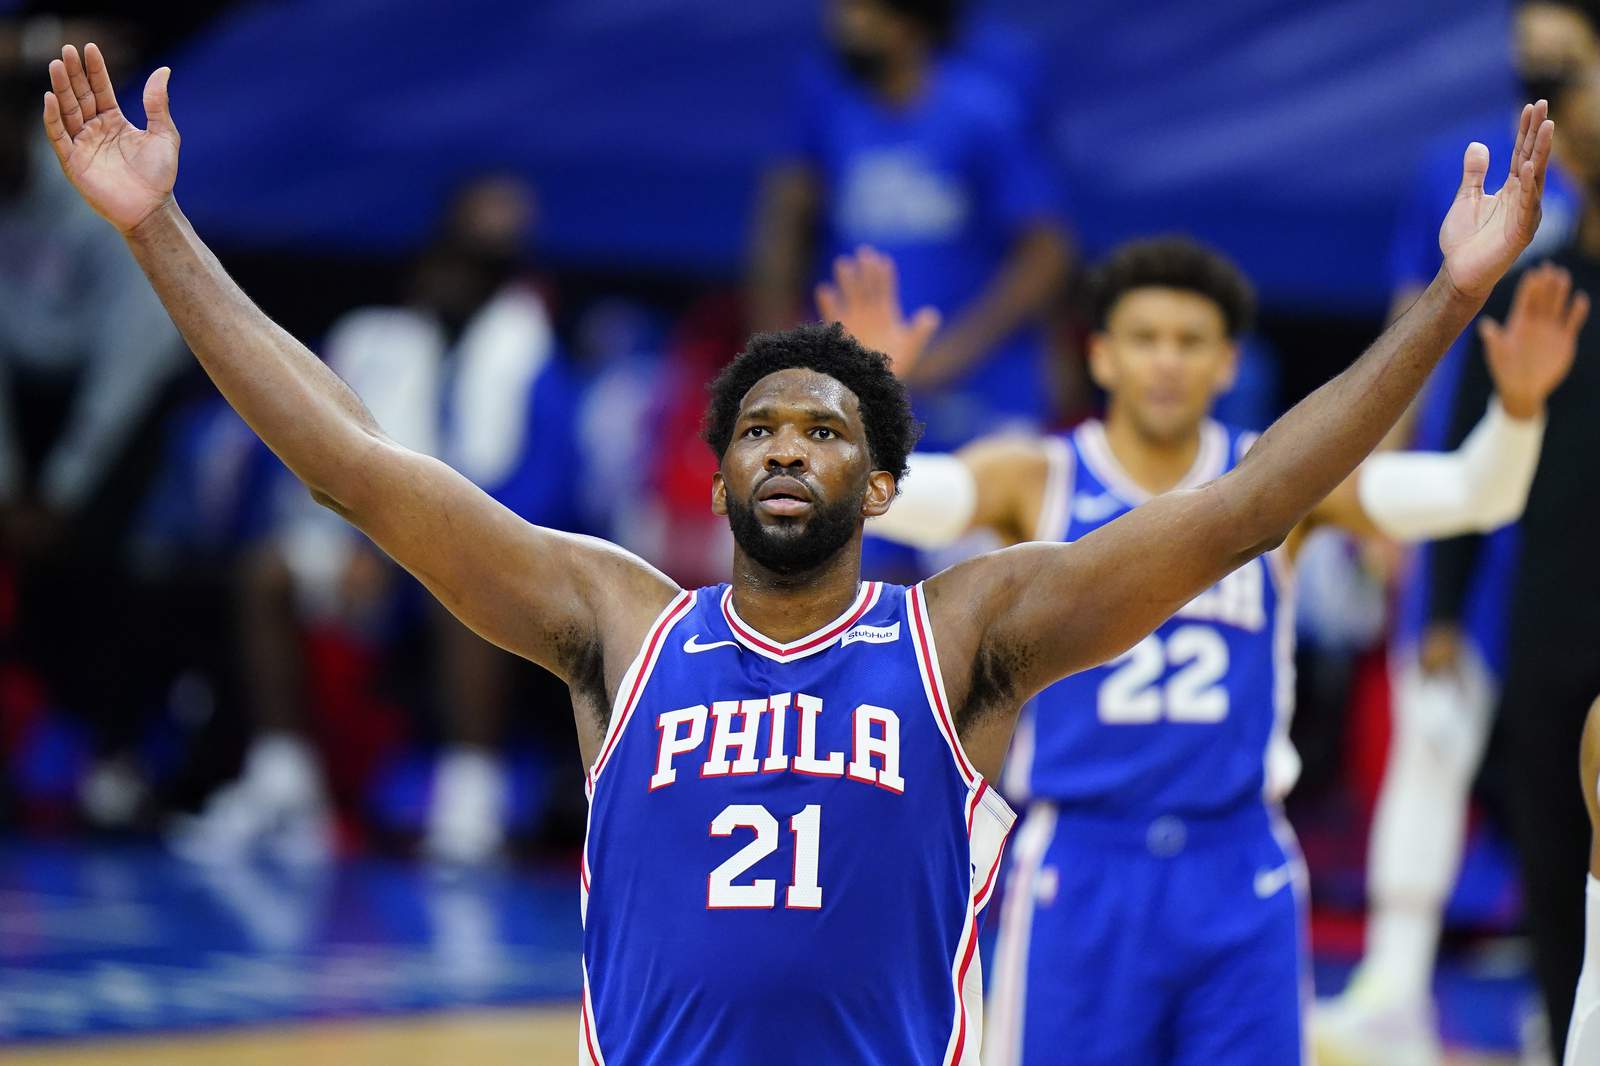 Embiid scores career-high 50 points to lead 76ers past Bulls